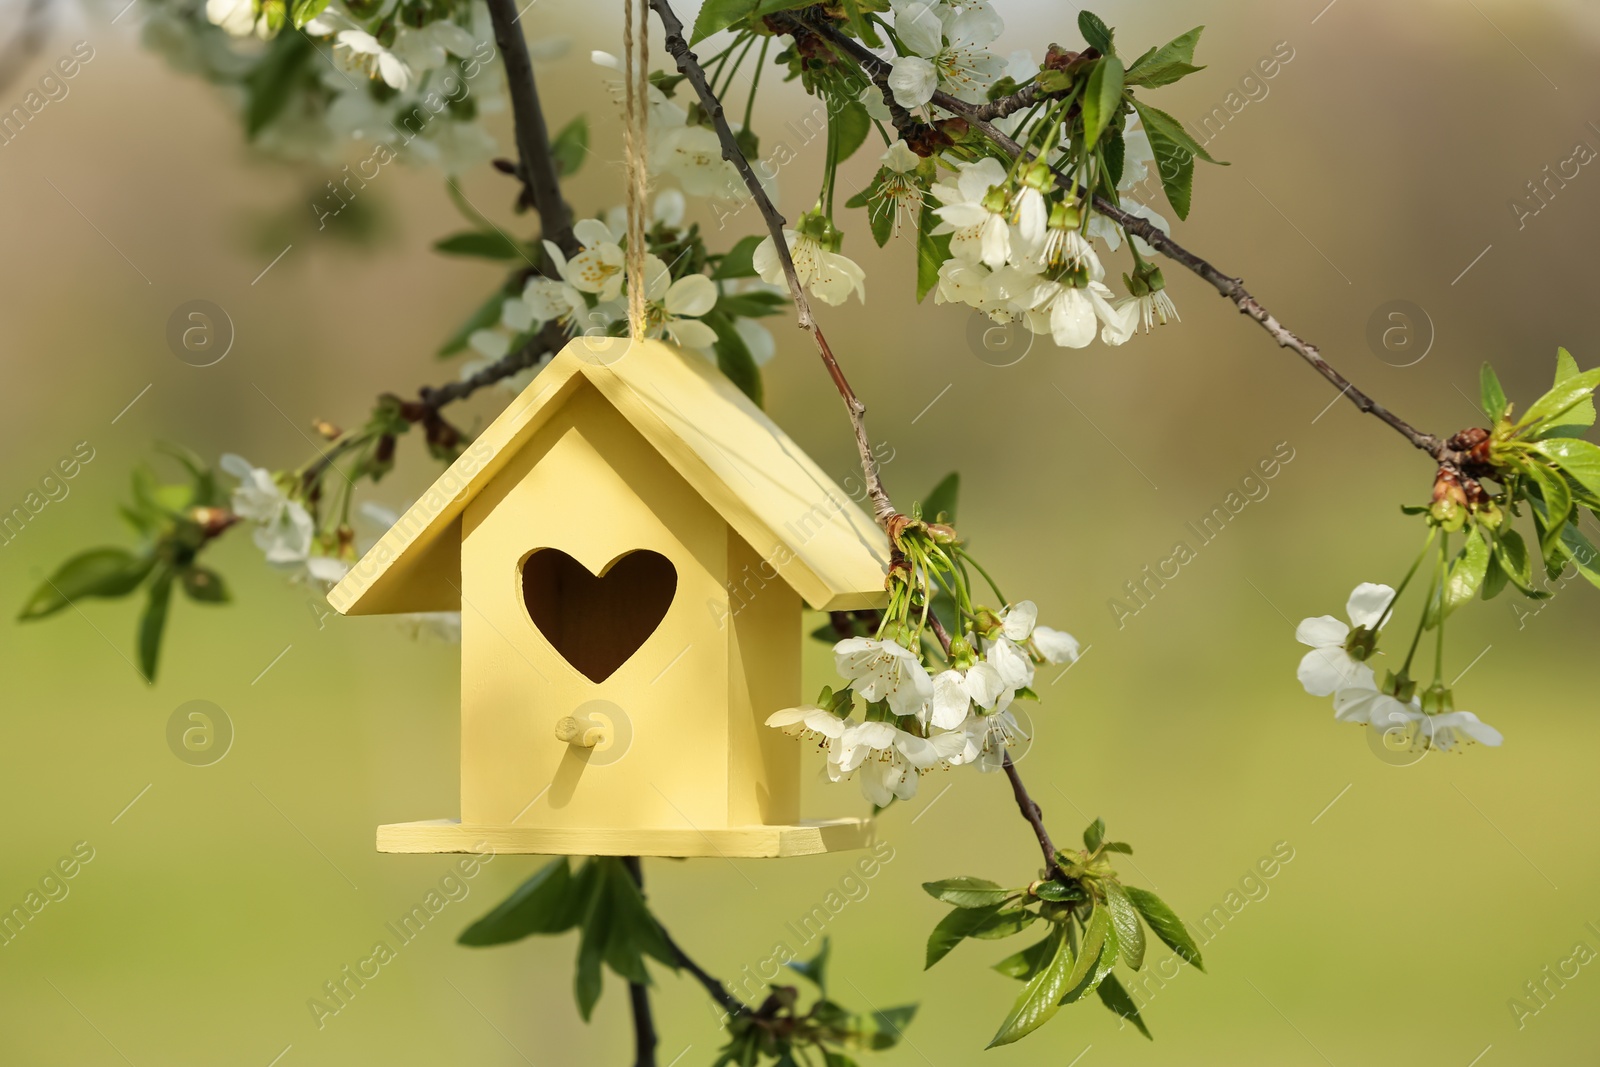 Photo of Yellow bird house with heart shaped hole hanging from tree branch outdoors